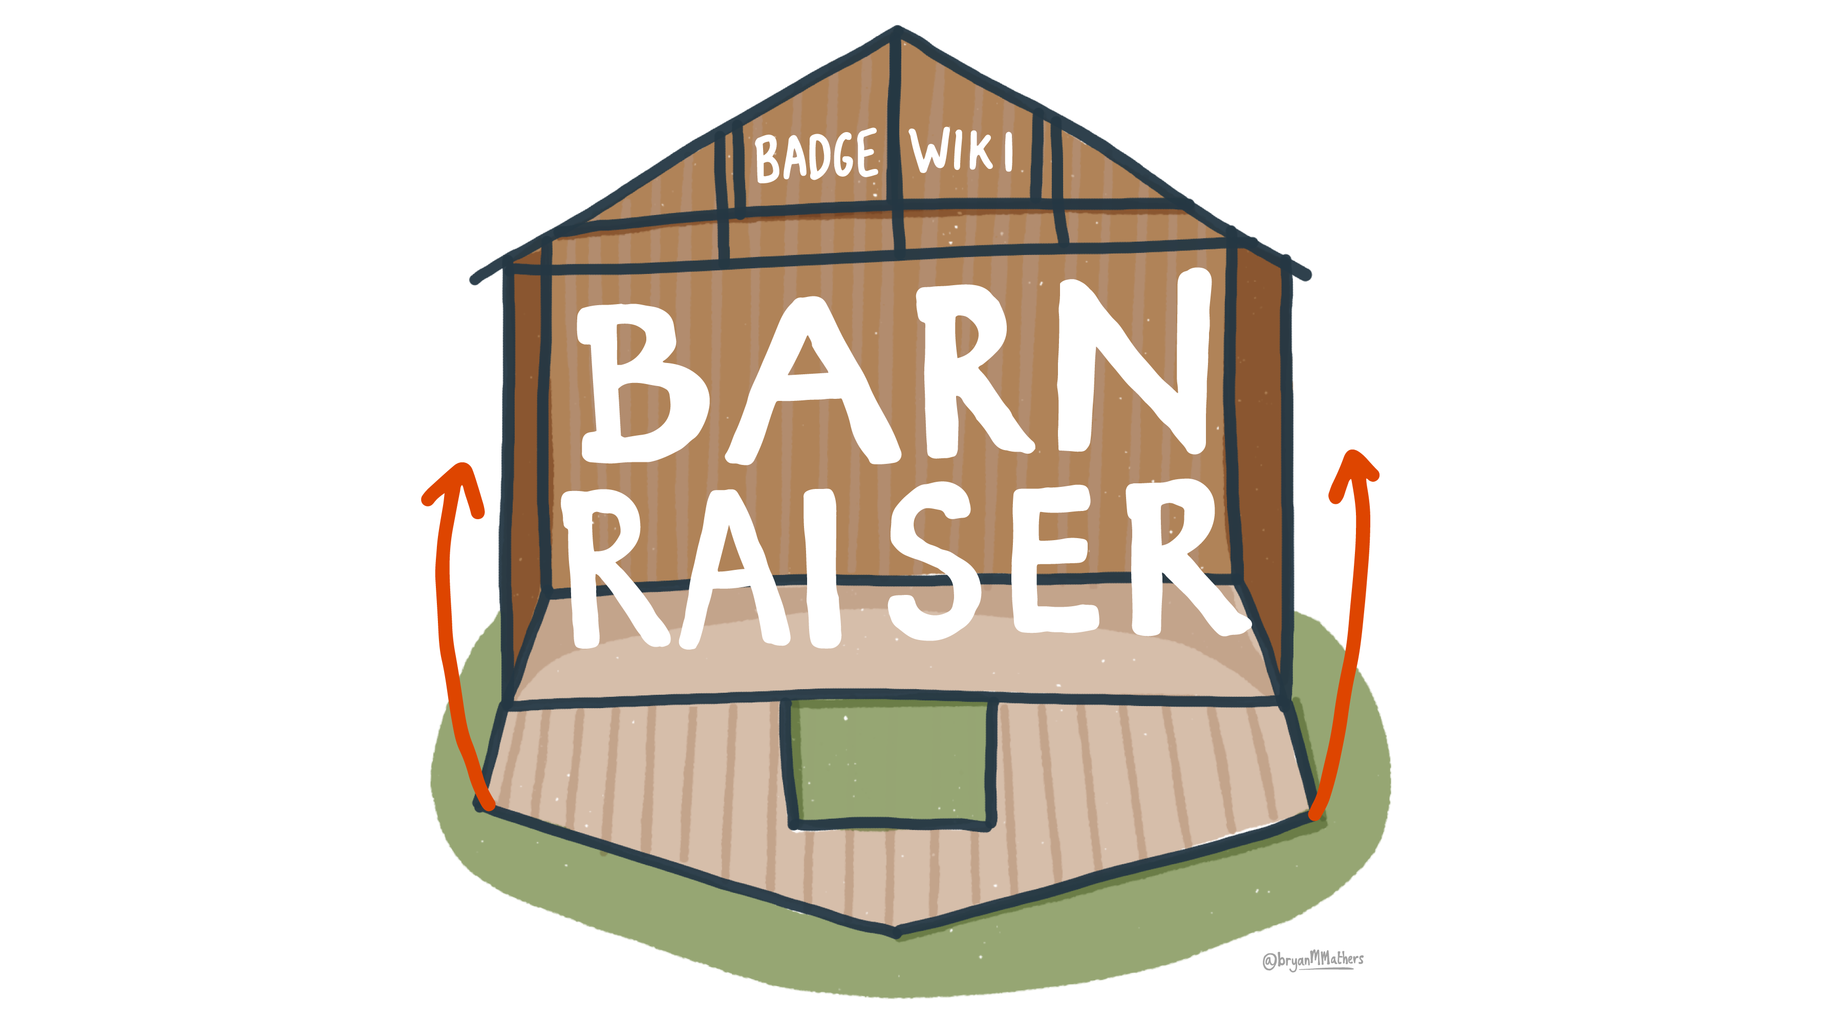 Join us tomorrow for the first Badge Wiki barn raising session!